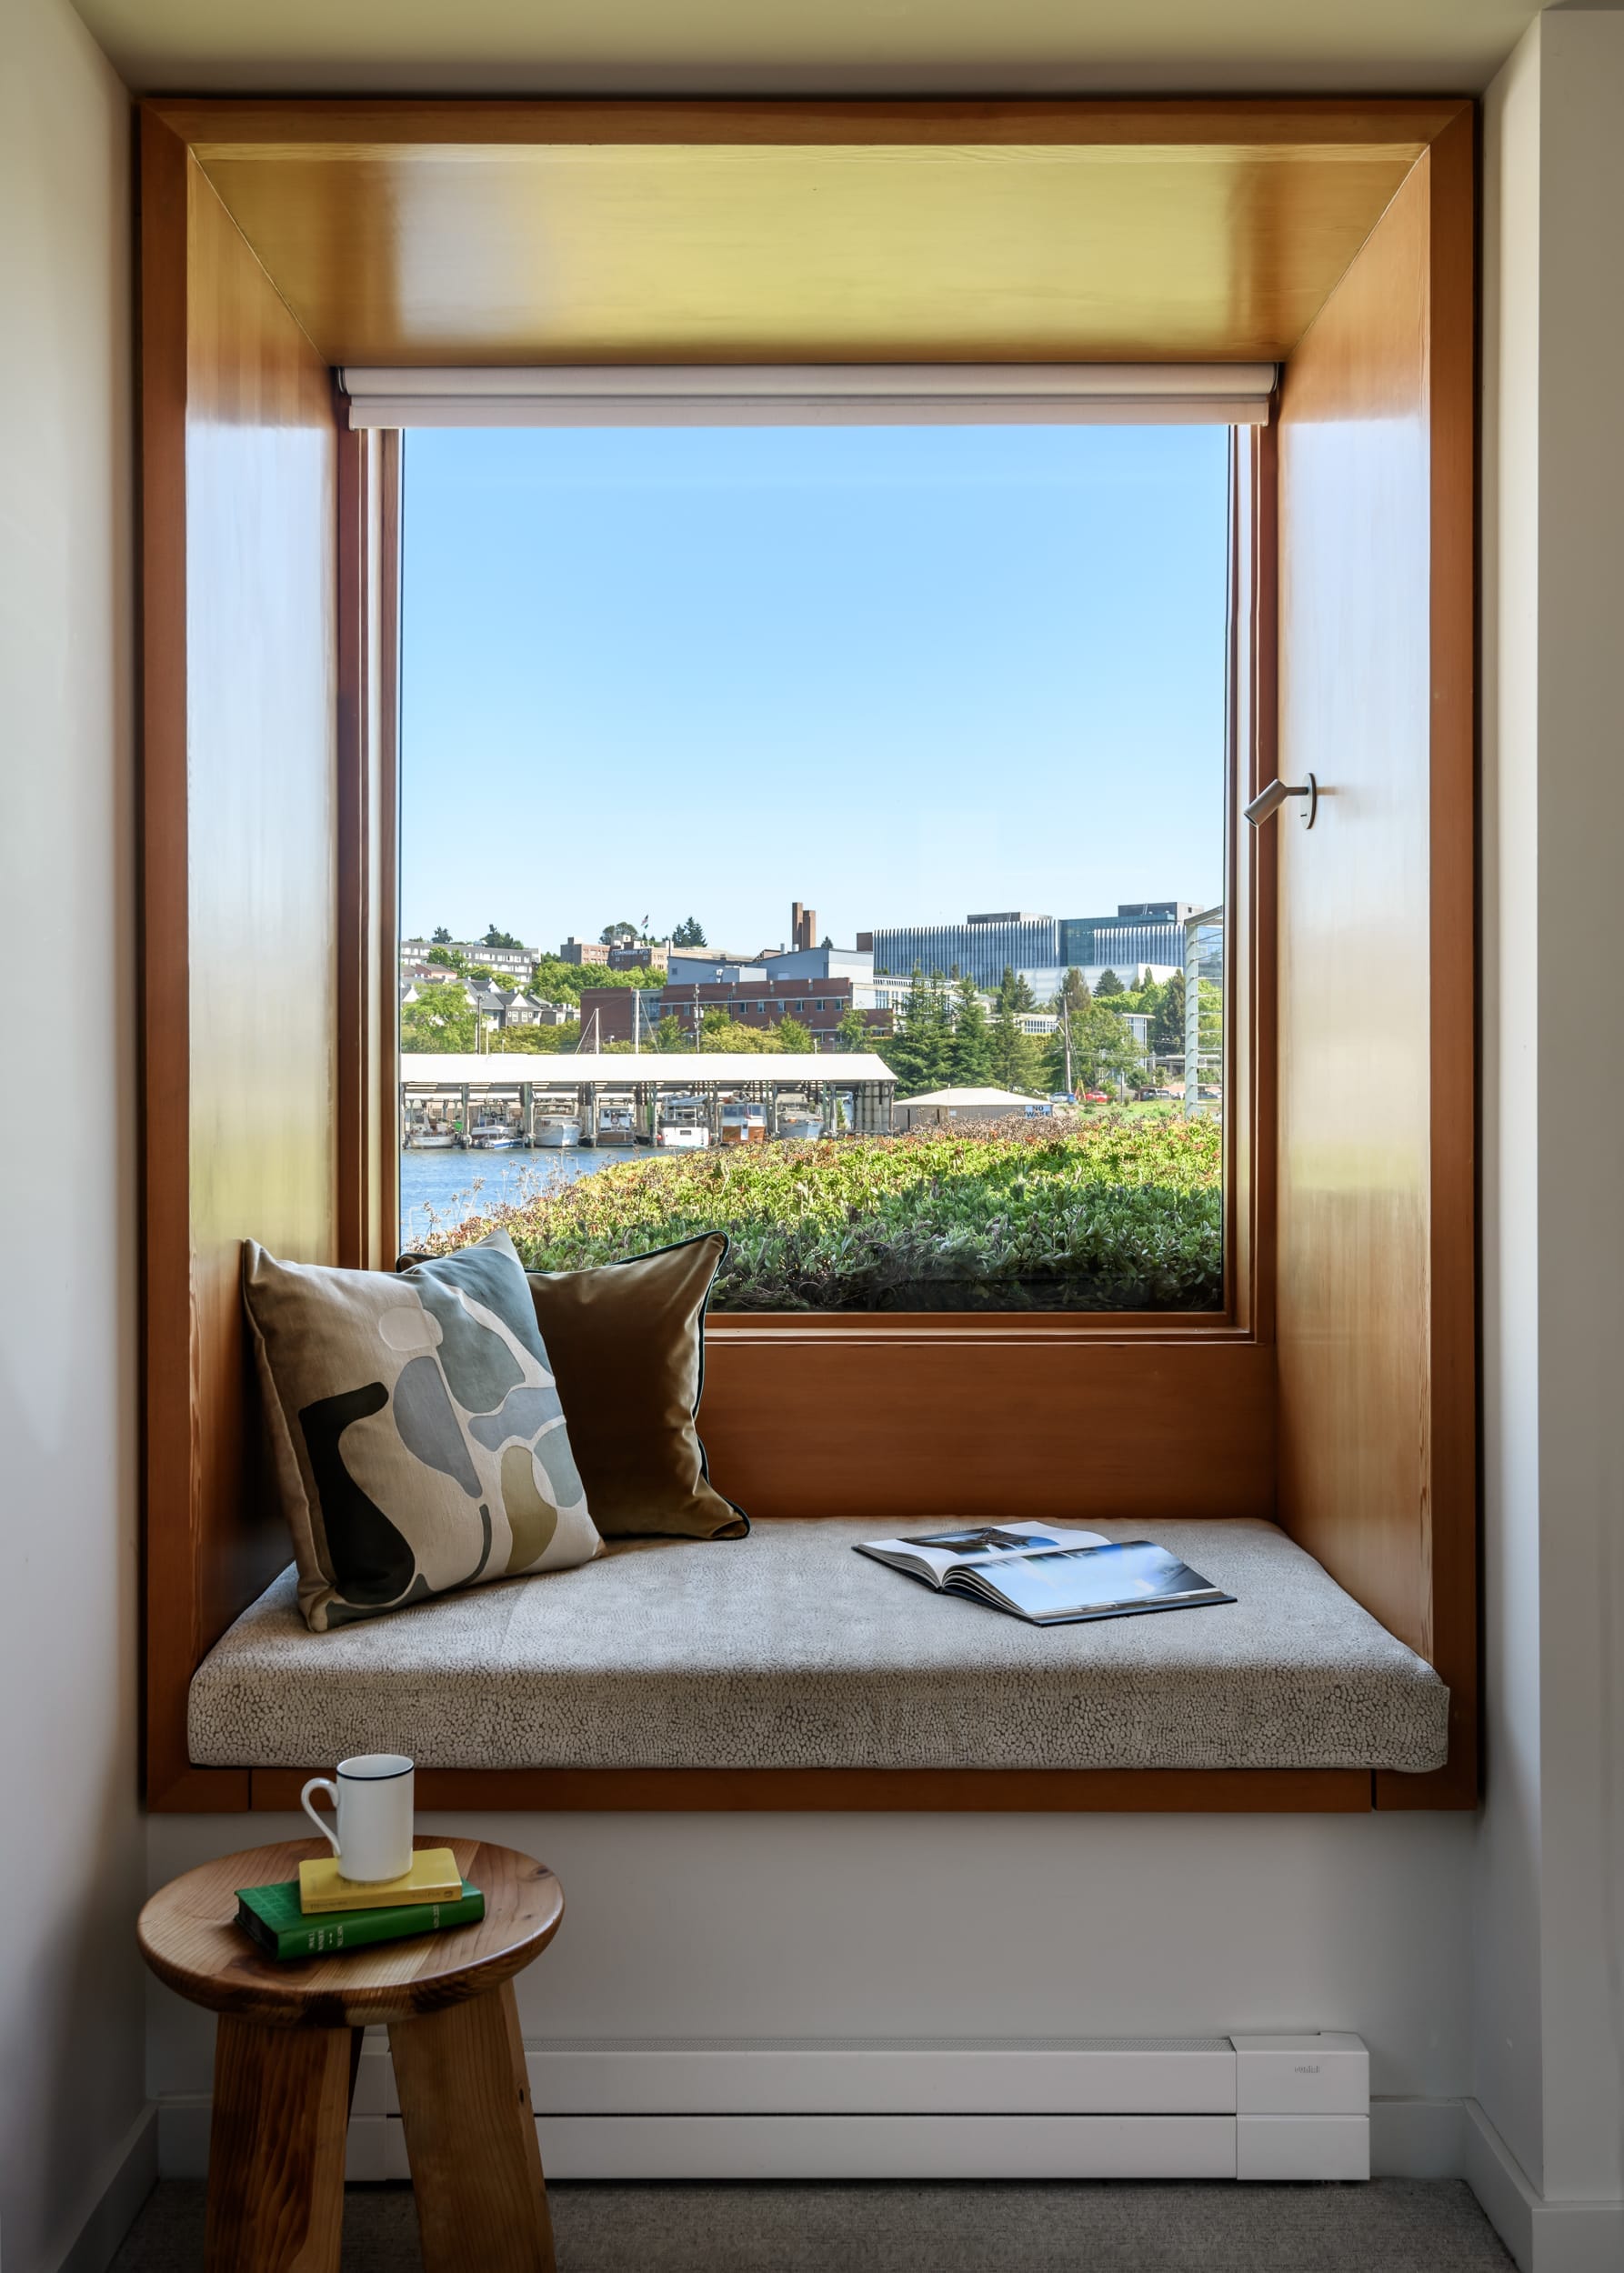 A window seat in a room with a view.